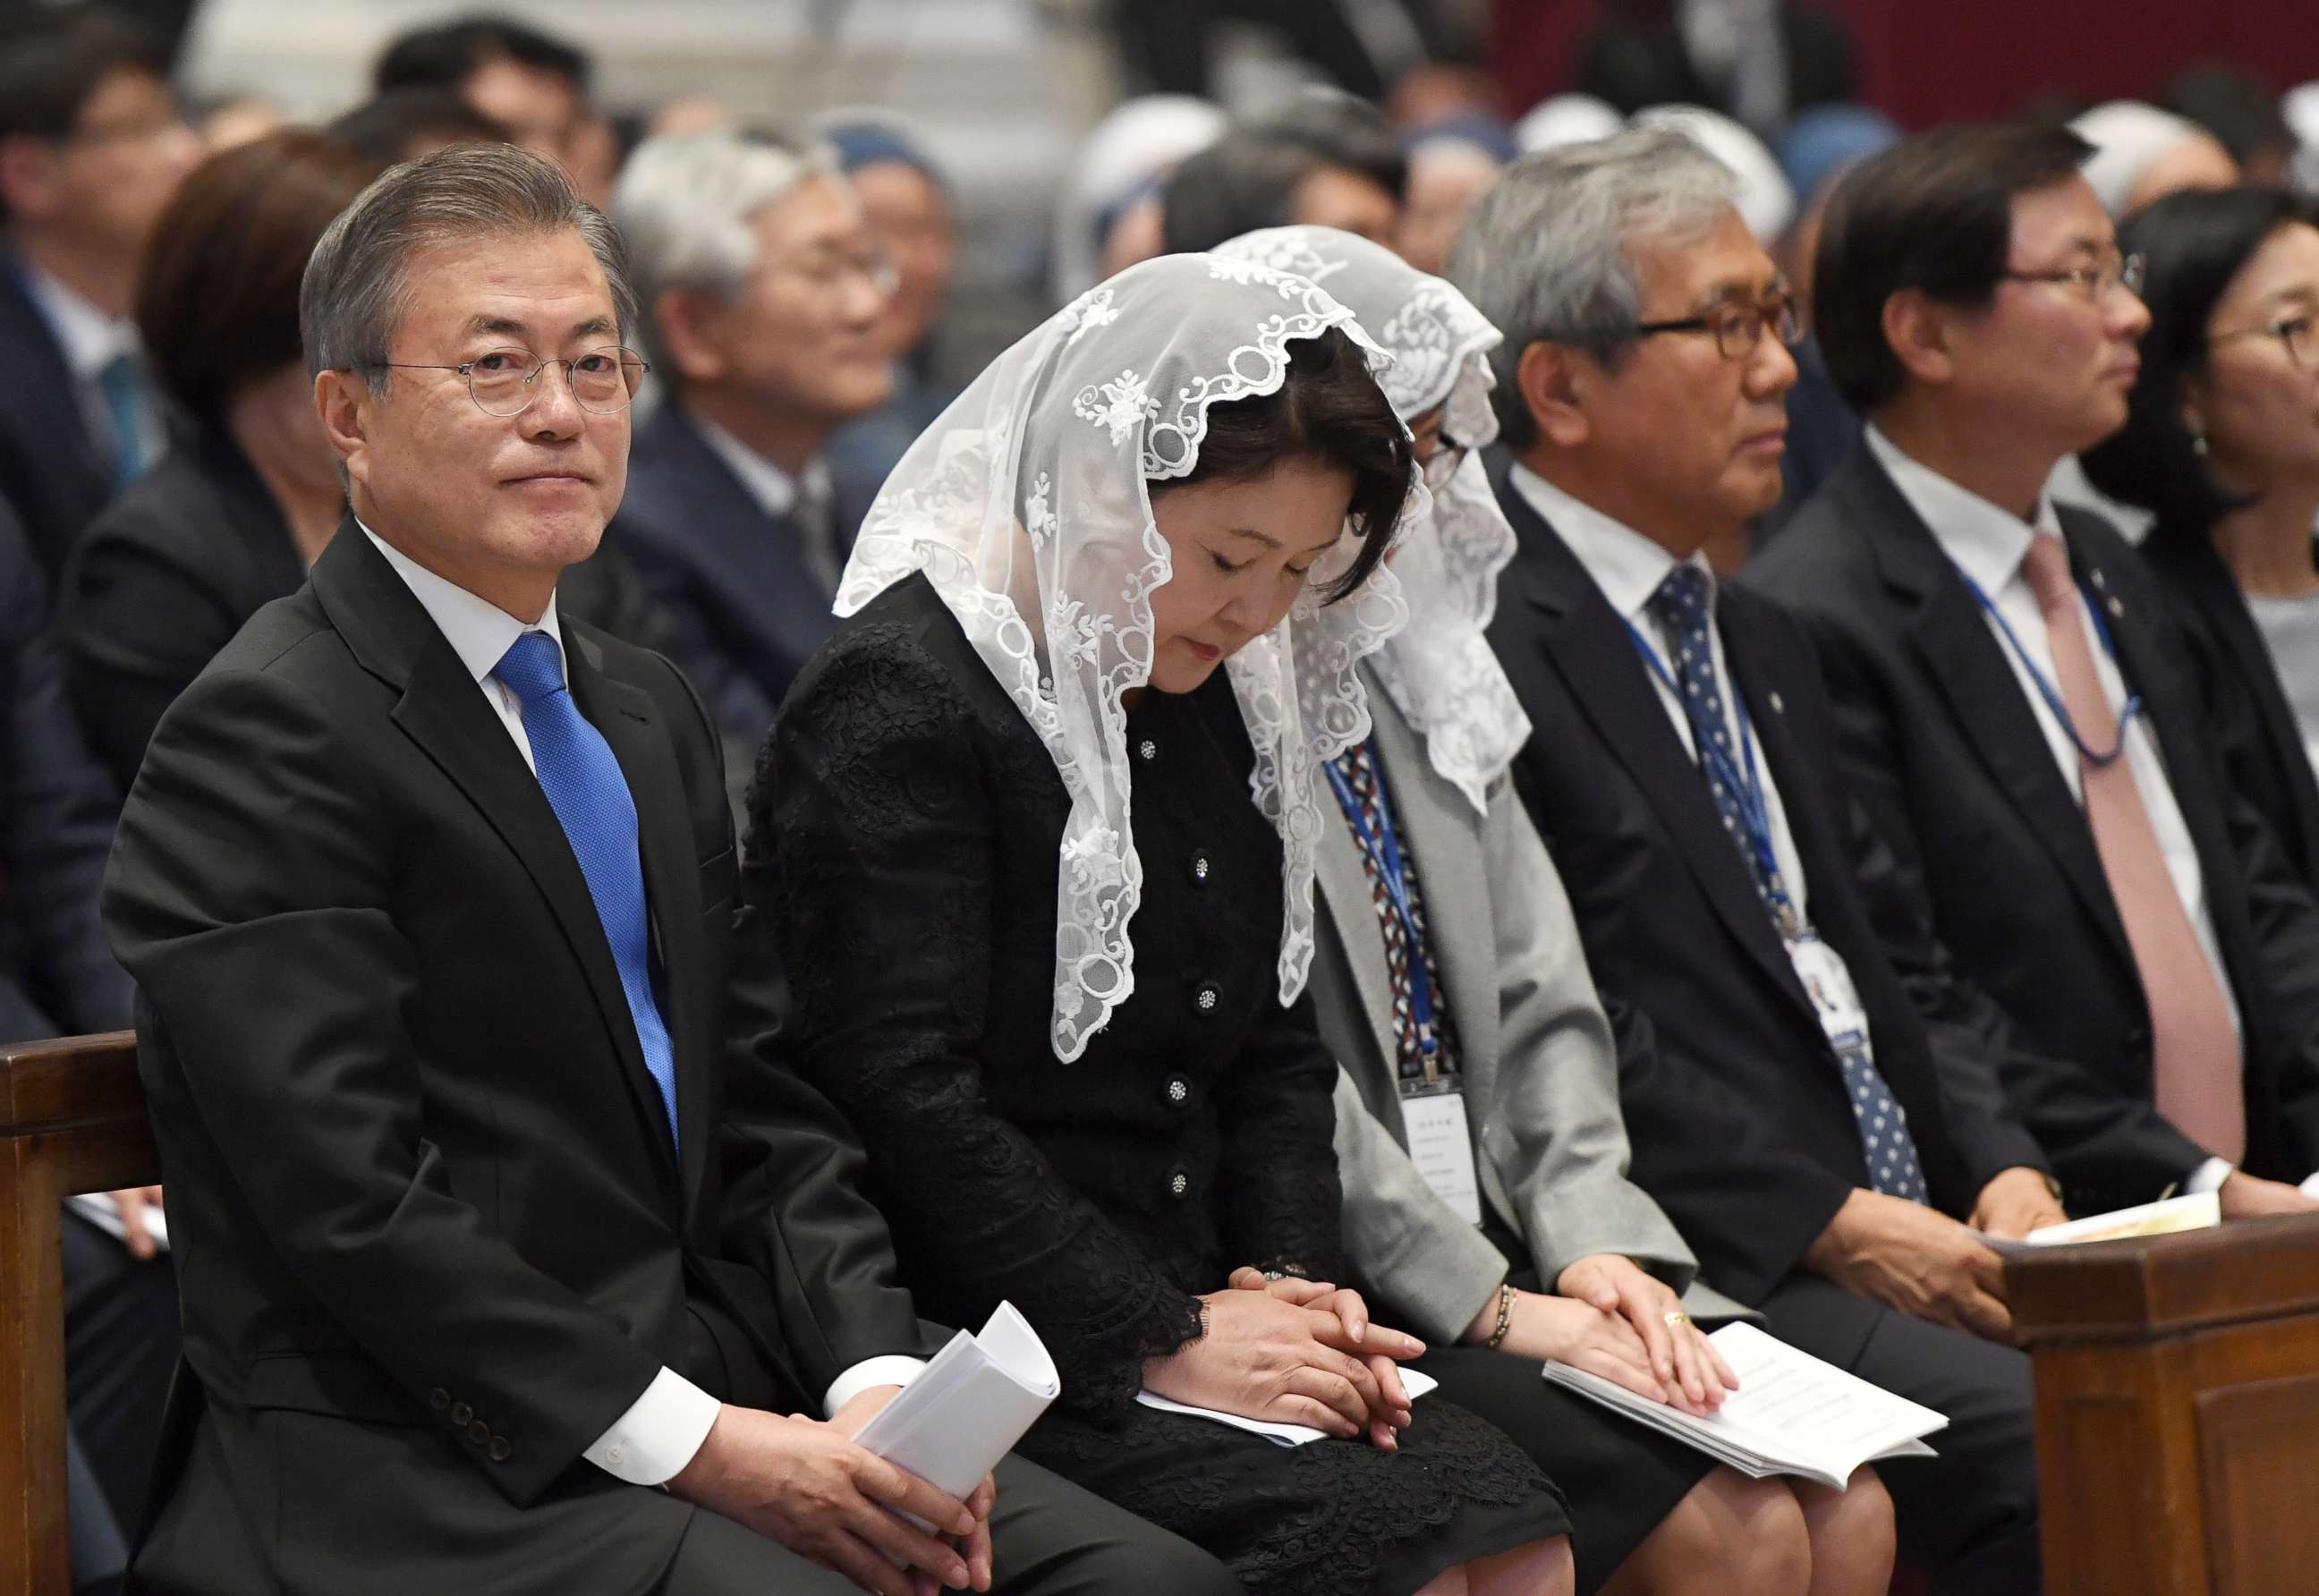 PHOTO: South Korean President Moon Jae-in attended a special mass for peace on the Korean Peninsula celebrated by Vatican's secretary of state Pietro Parolin at St. Peter's Basilica in the Vatican, Oct. 17, 2018, in Rome.